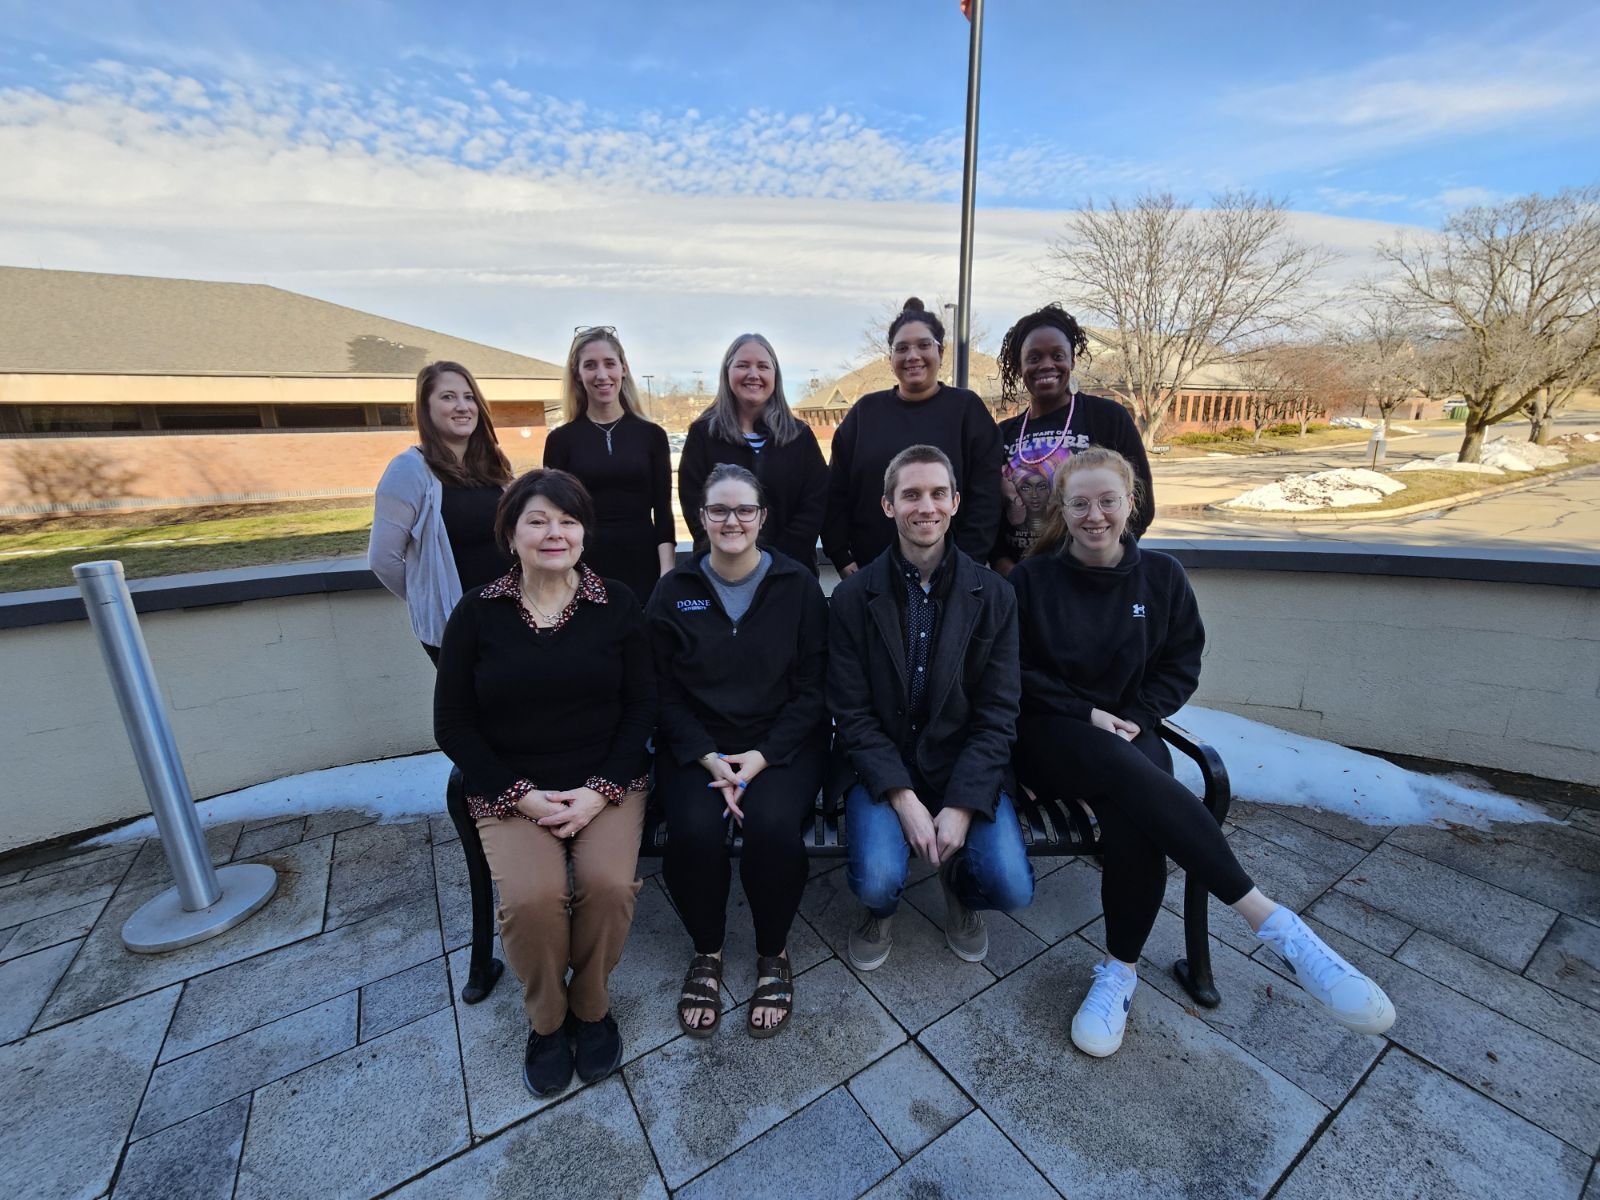 Doane employees from the Academic Success Center, Academic Affairs and the Registrar's office pose in two rows on a bench outside of the Fred Brown Center.